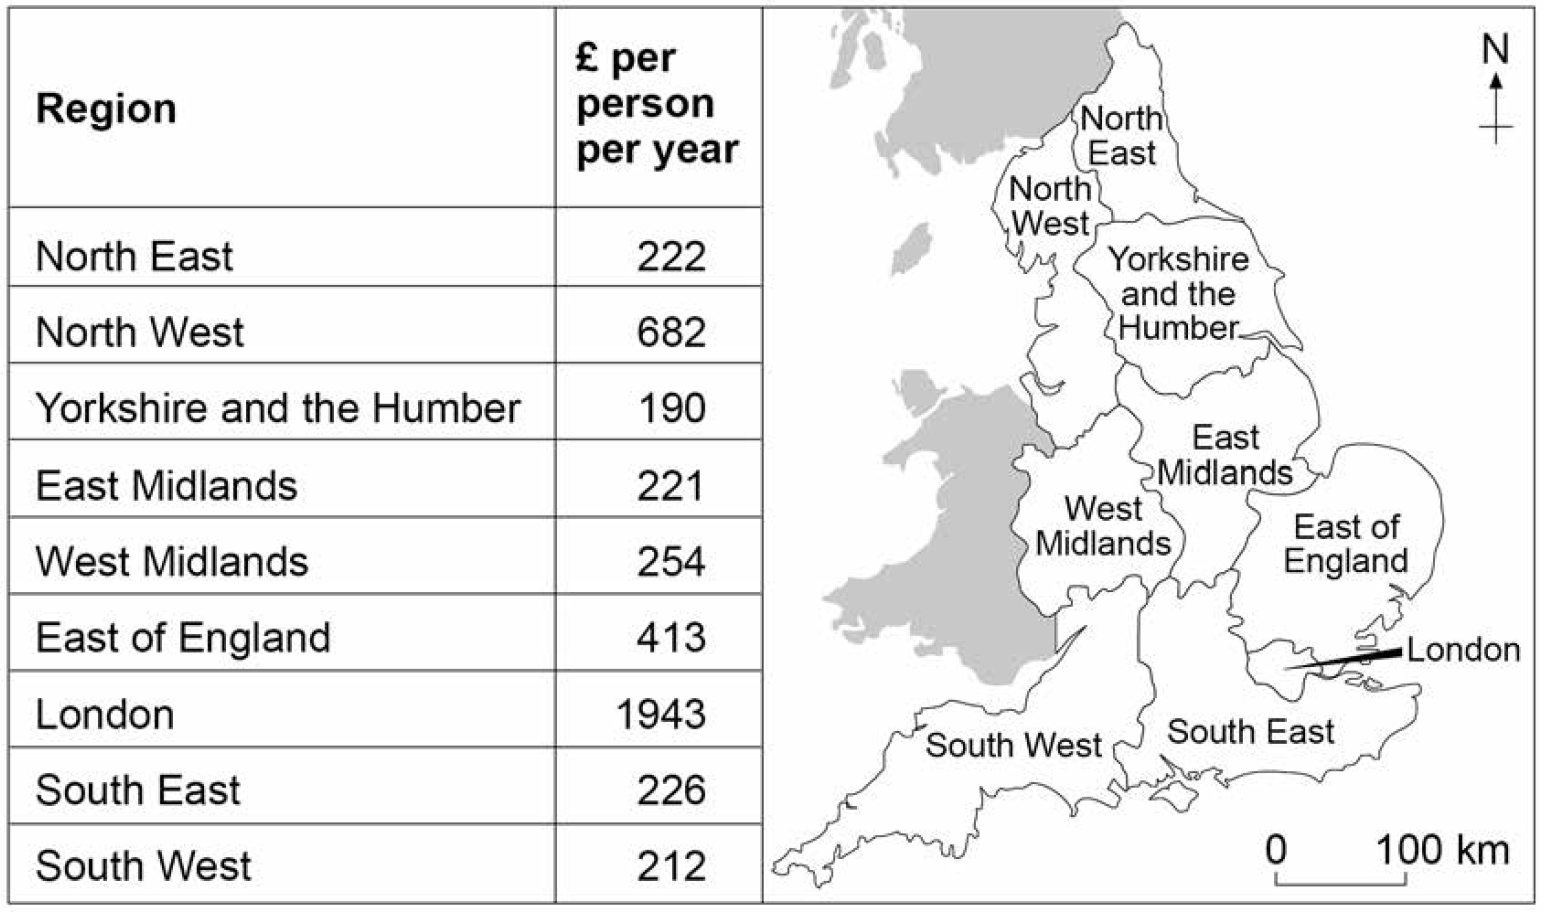 Planned spending on transport infrastructure in England’s regions 2016–2021